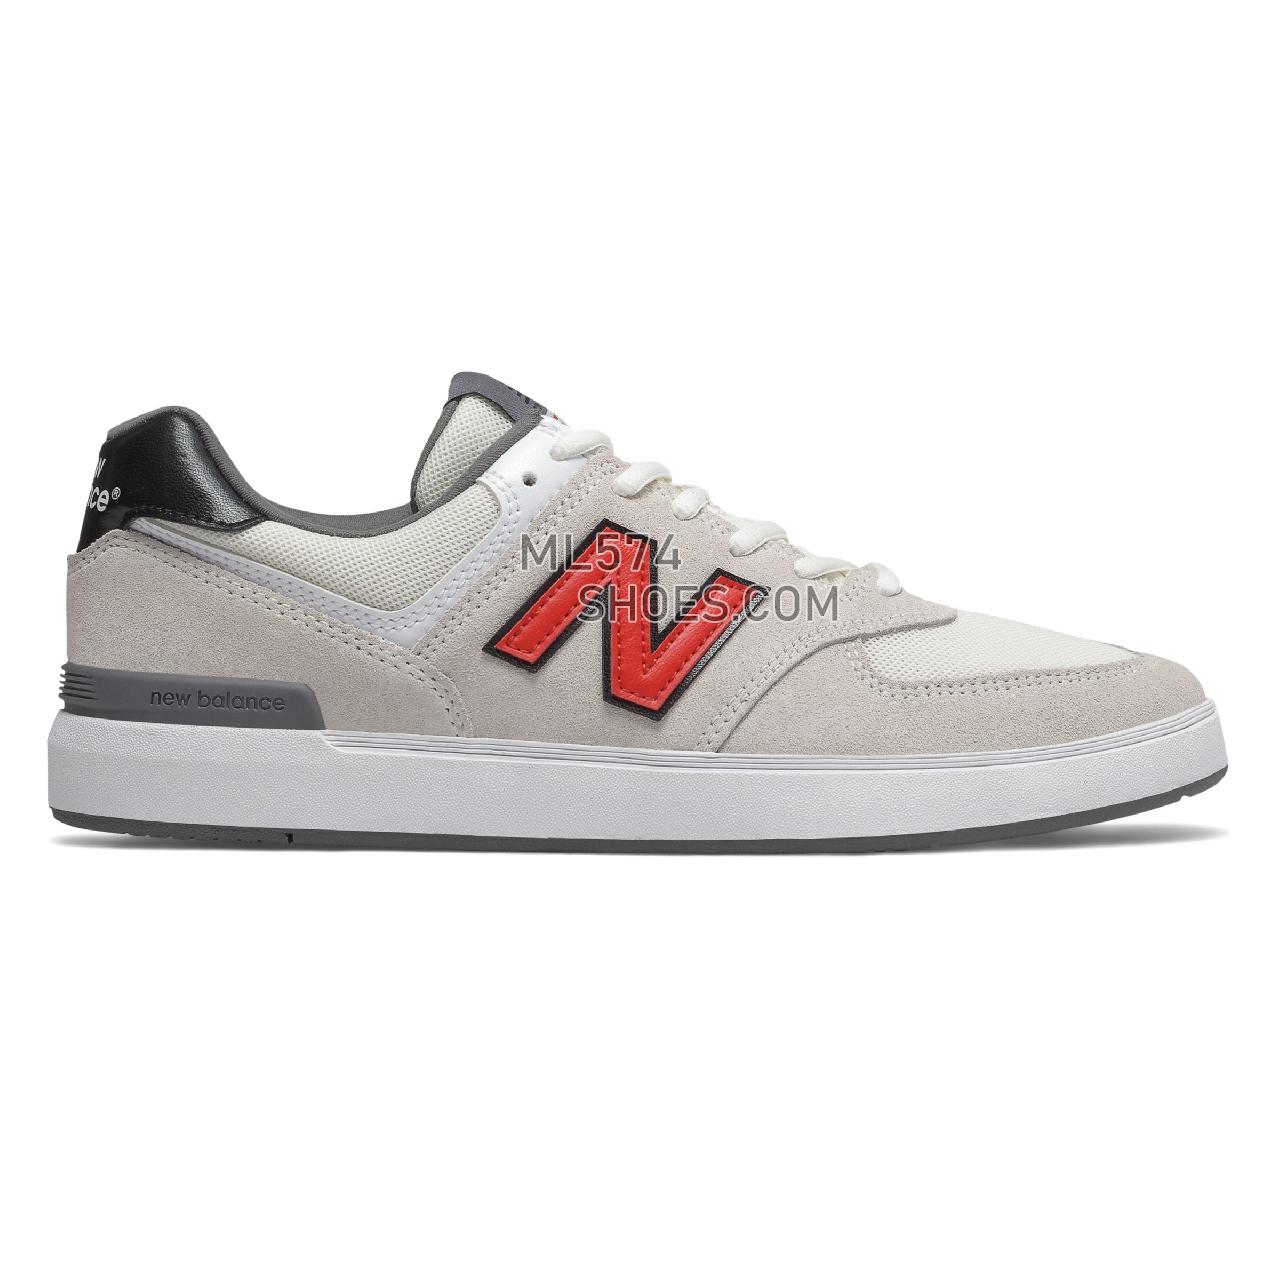 New Balance All Coasts 574 - Men's Court Classics - White with Red - AM574WHR